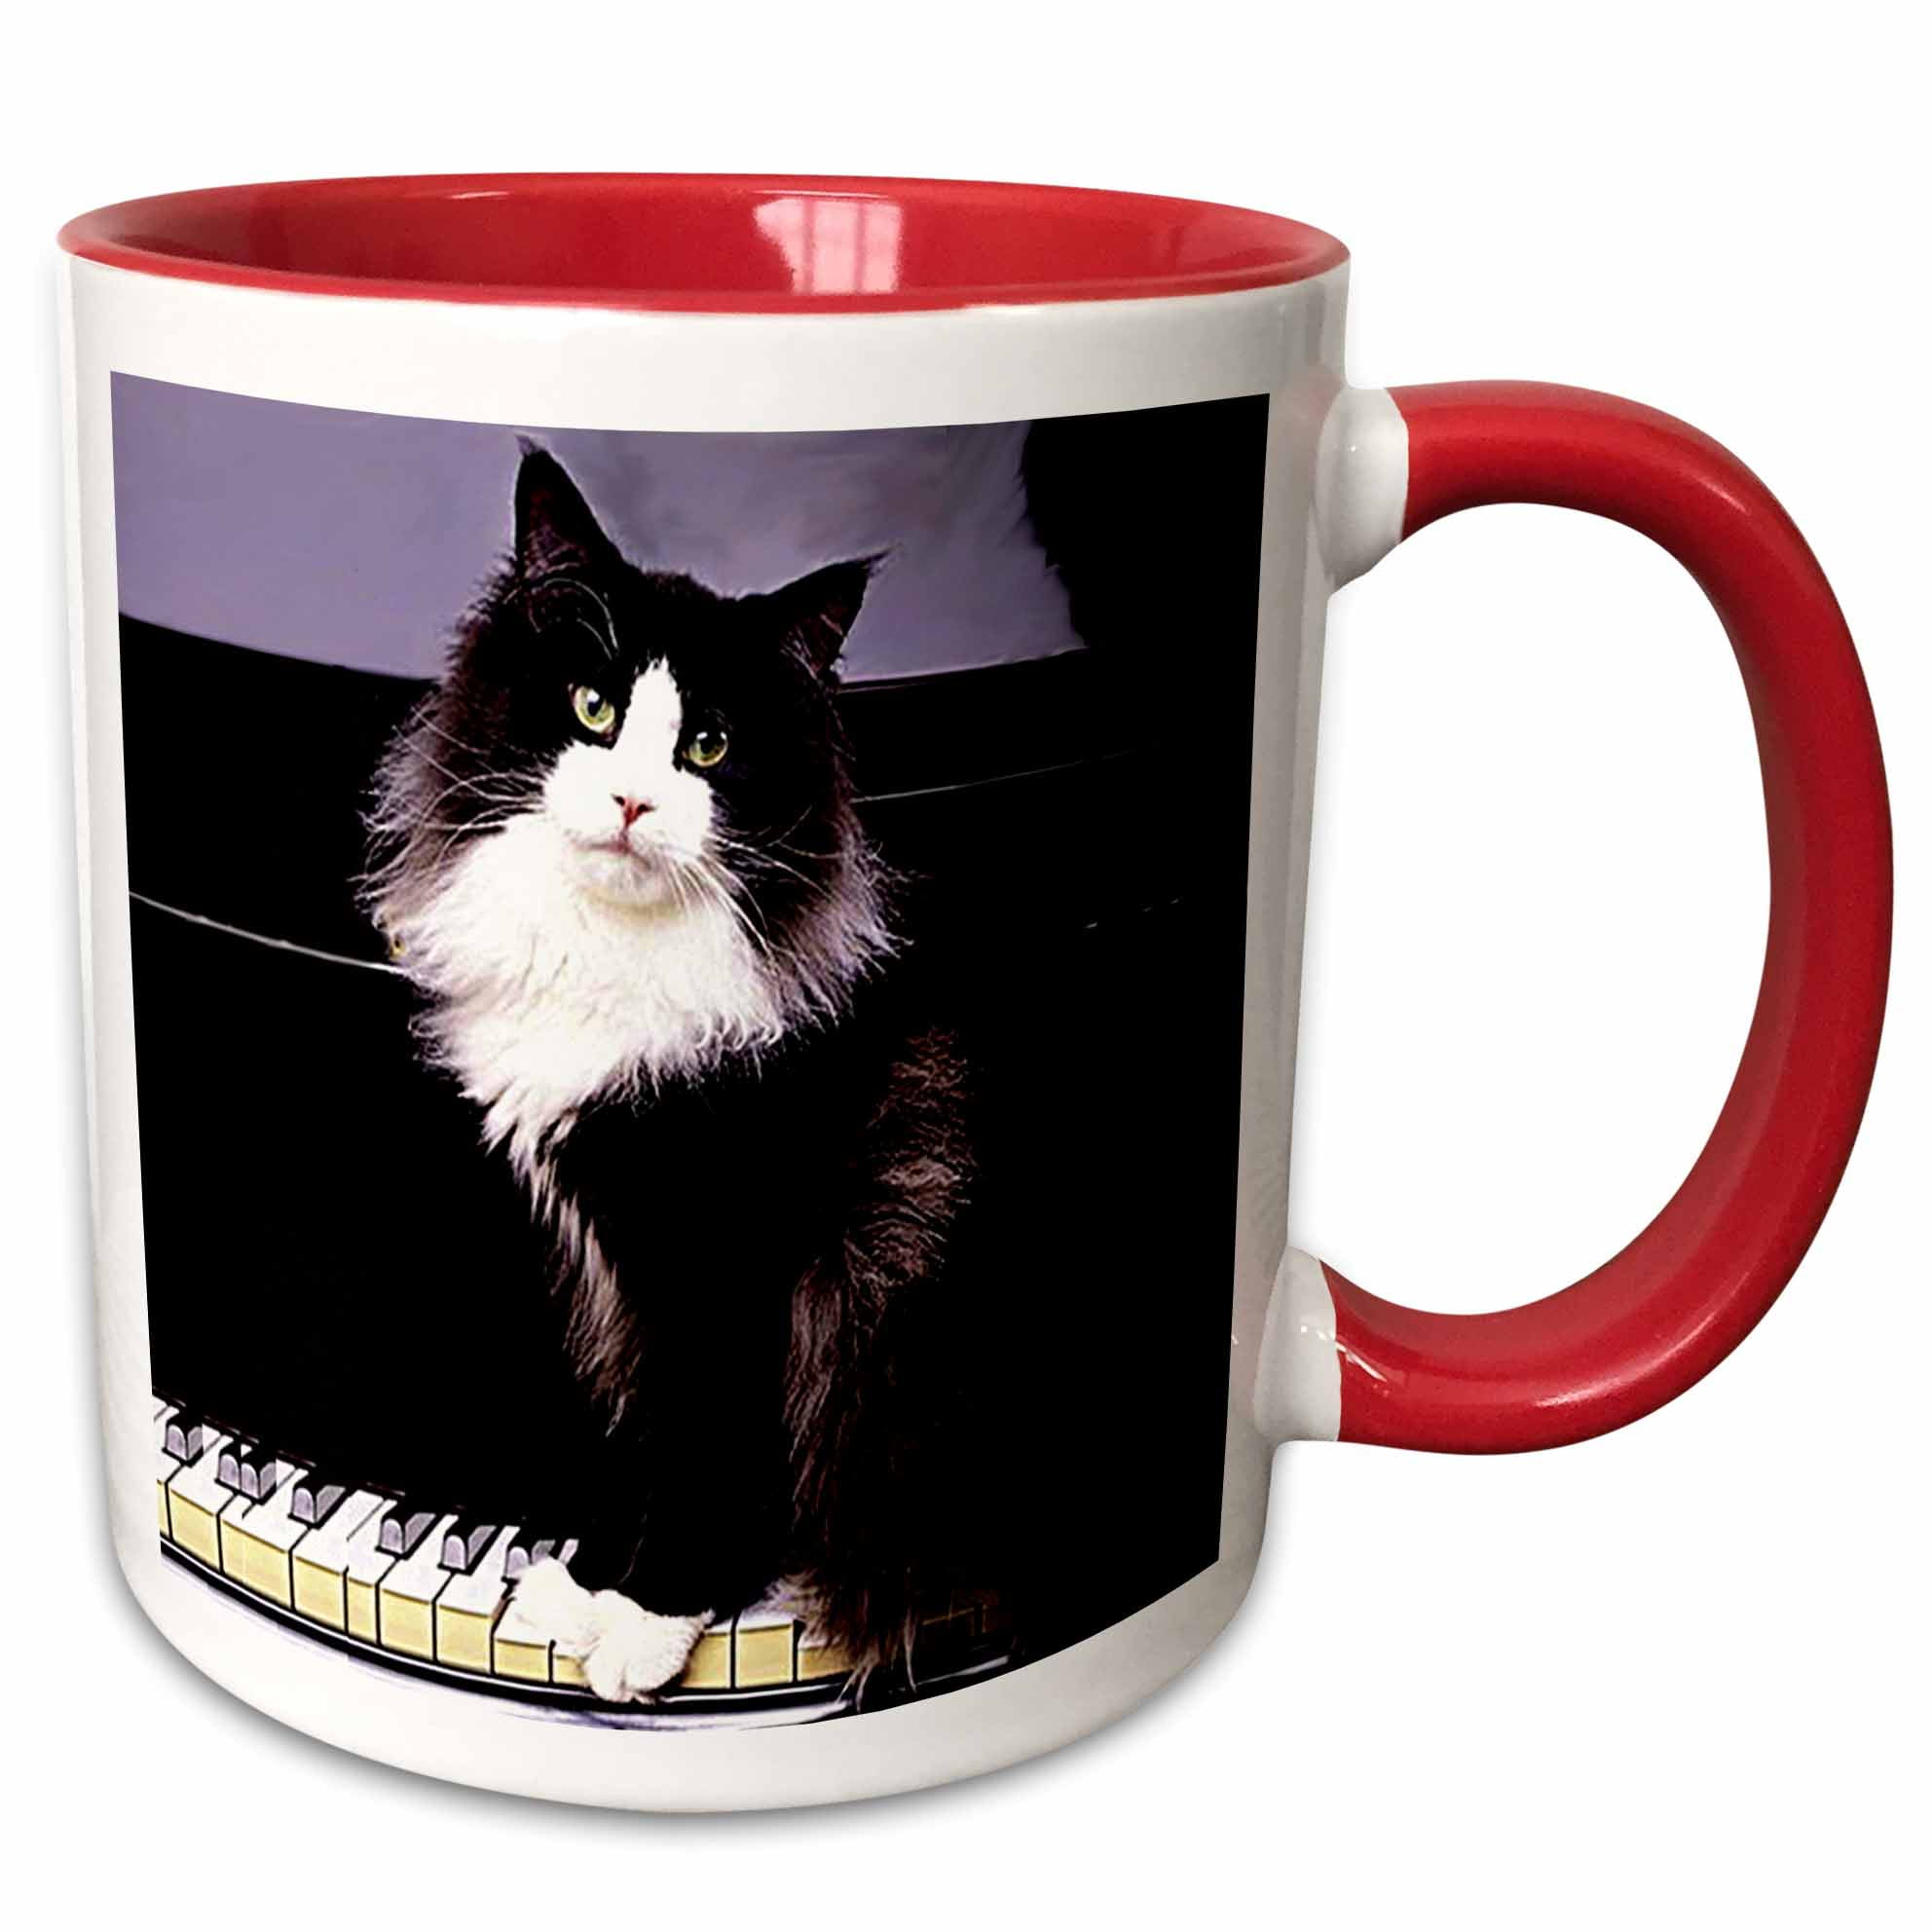 Kittys with Linked Tails Coffee or Tea 11oz Mug Cat Heart Perfect Gift for Cat and Animal Lovers 